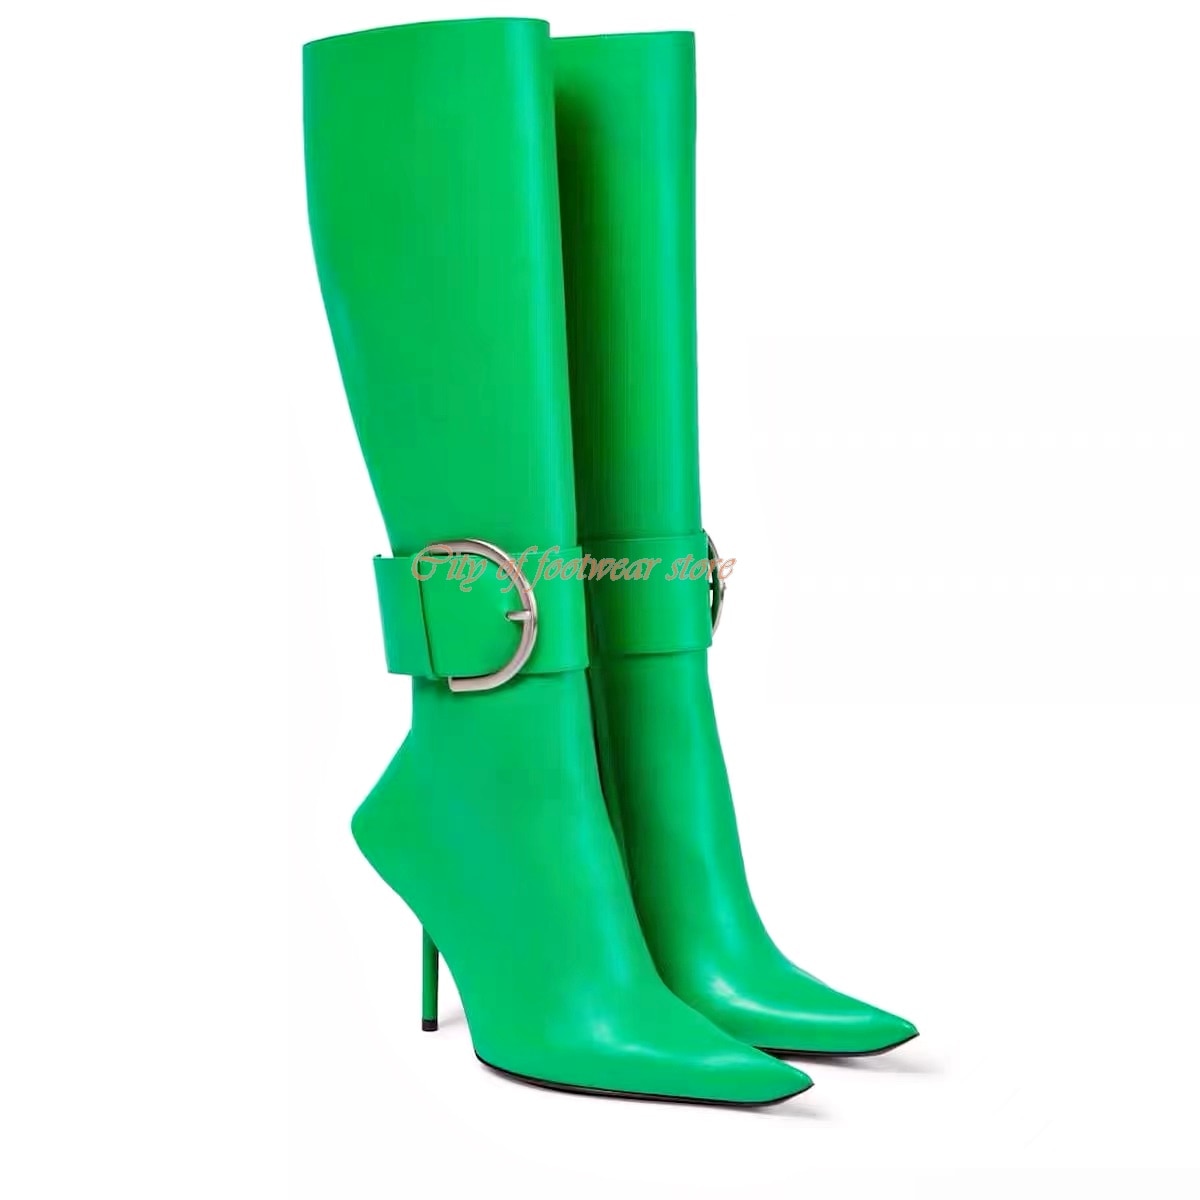 Metallic Pointed Toe Boot in Purple\Green Women Black Stiletto Leather Knee-high Boots